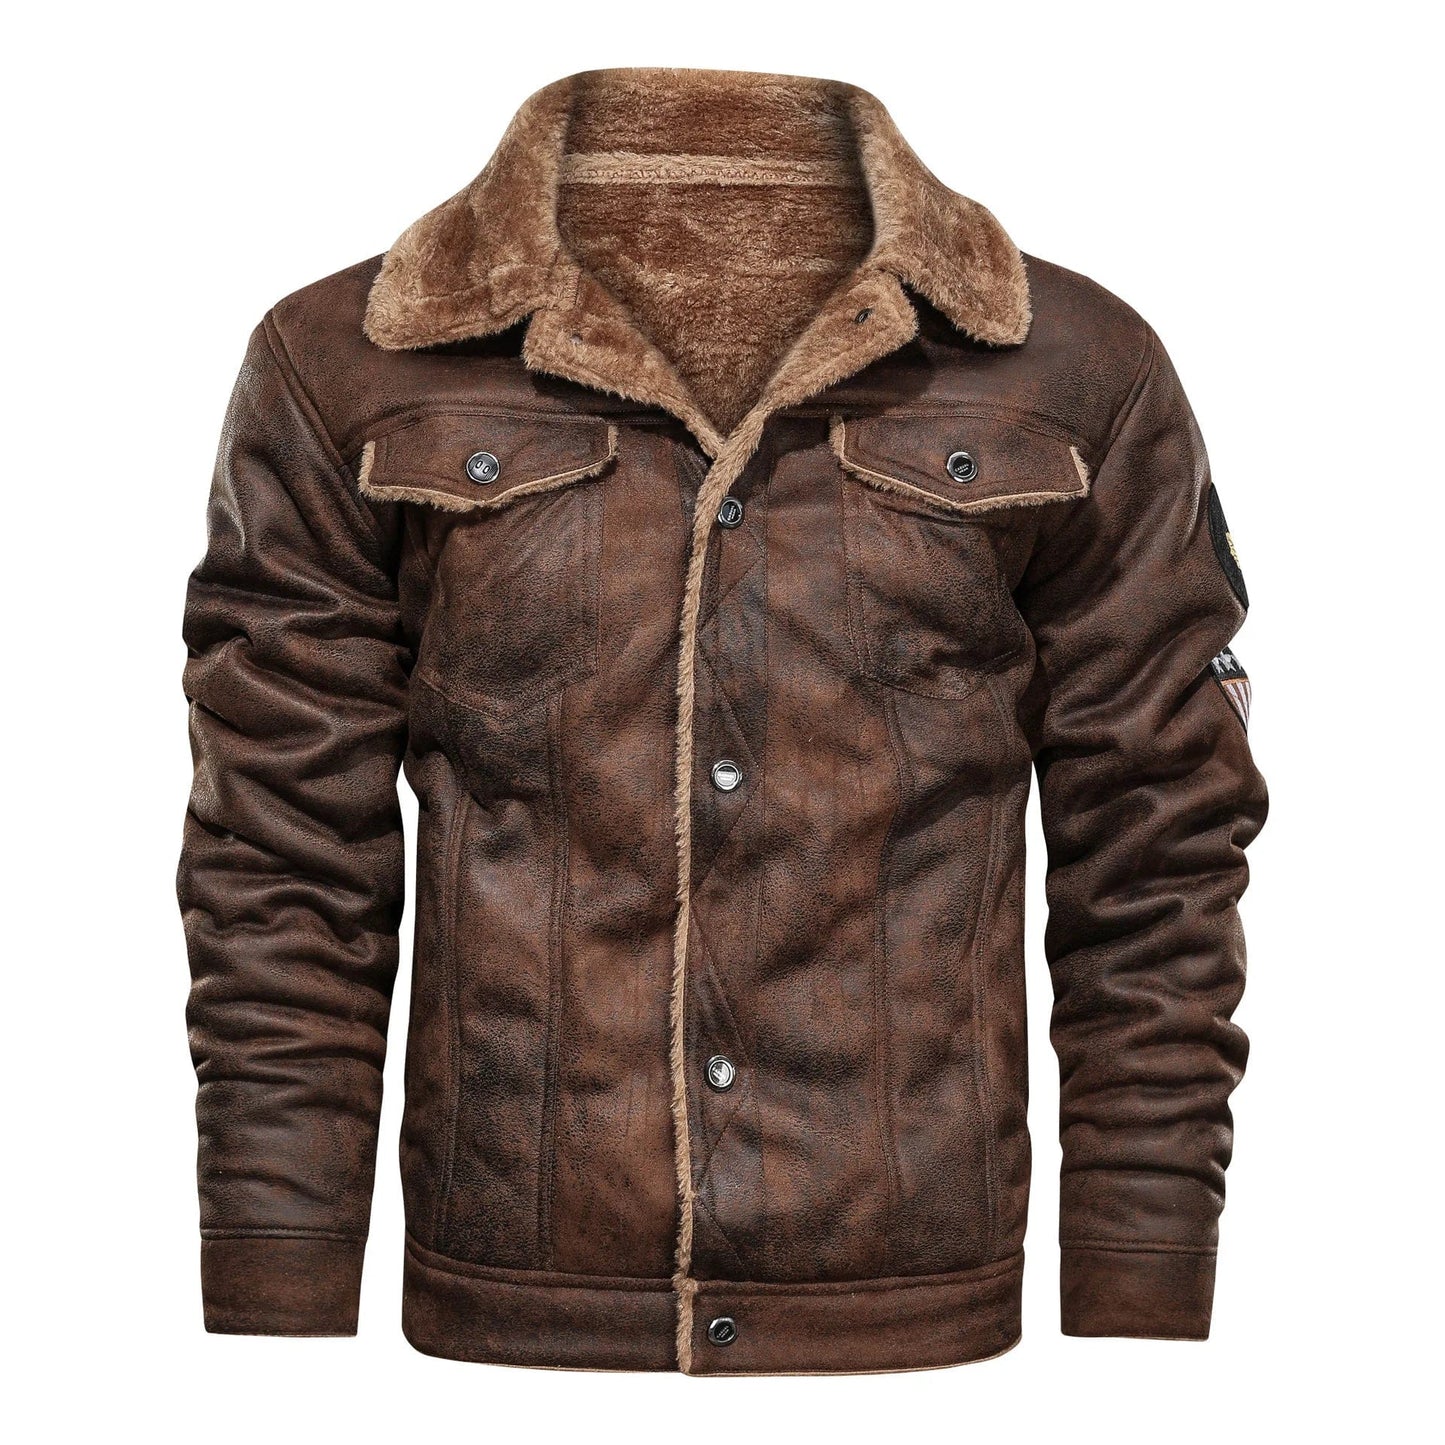 New Fashion Male Fleece Warm Coats Slim Fit Jackets Men Winter Bomber Jackets Leather and Fur Integrated Jackets And Coats4XL